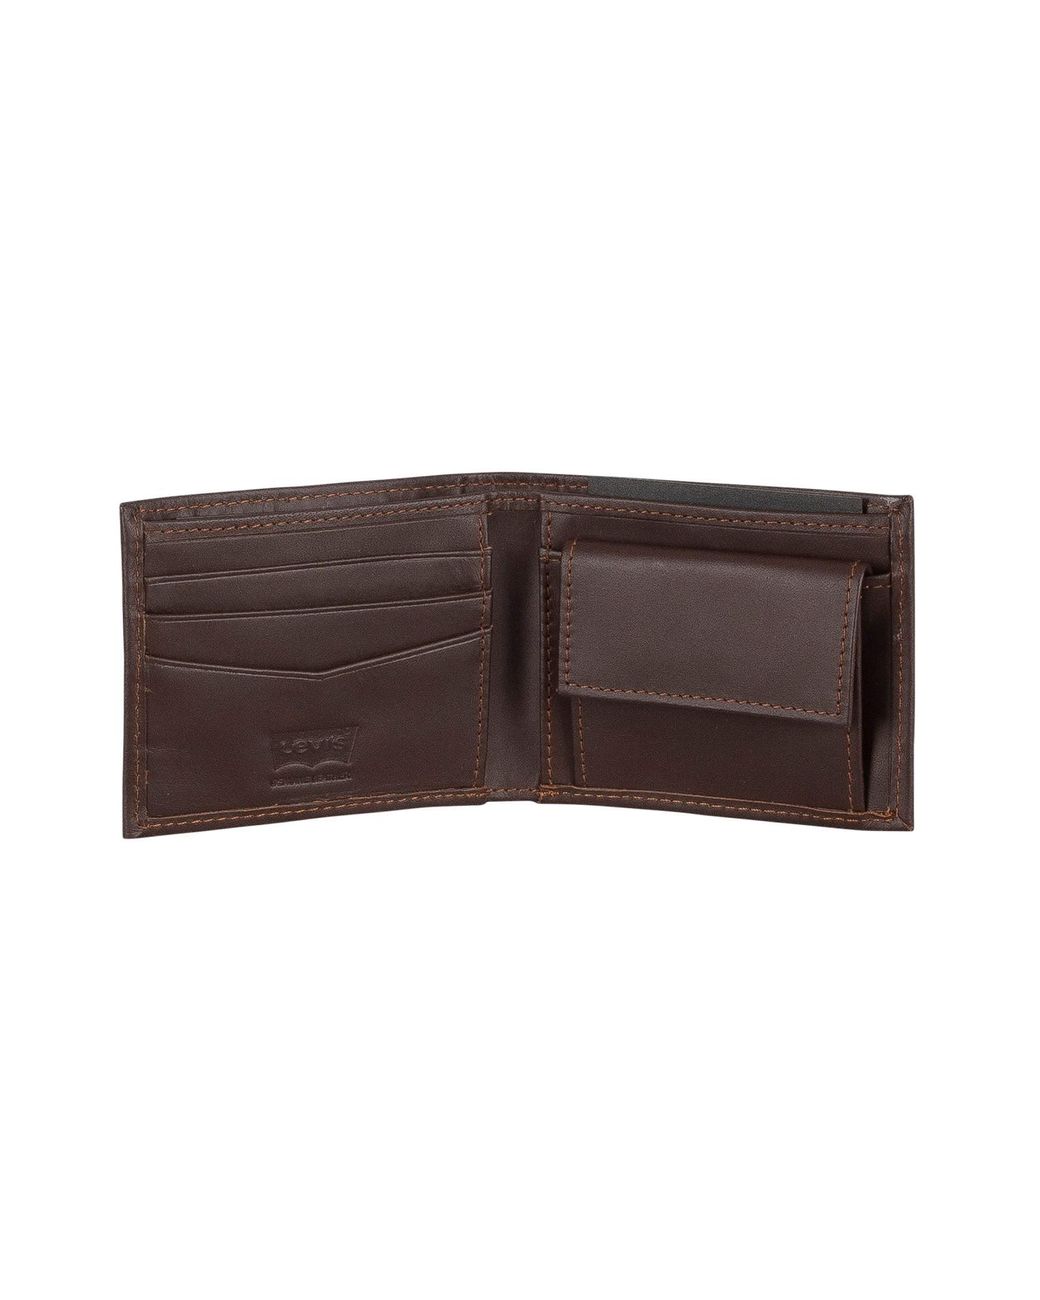 Buy Levi's Men's Wallet Pu Leather |Card Holder,2 Compartment at Amazon.in